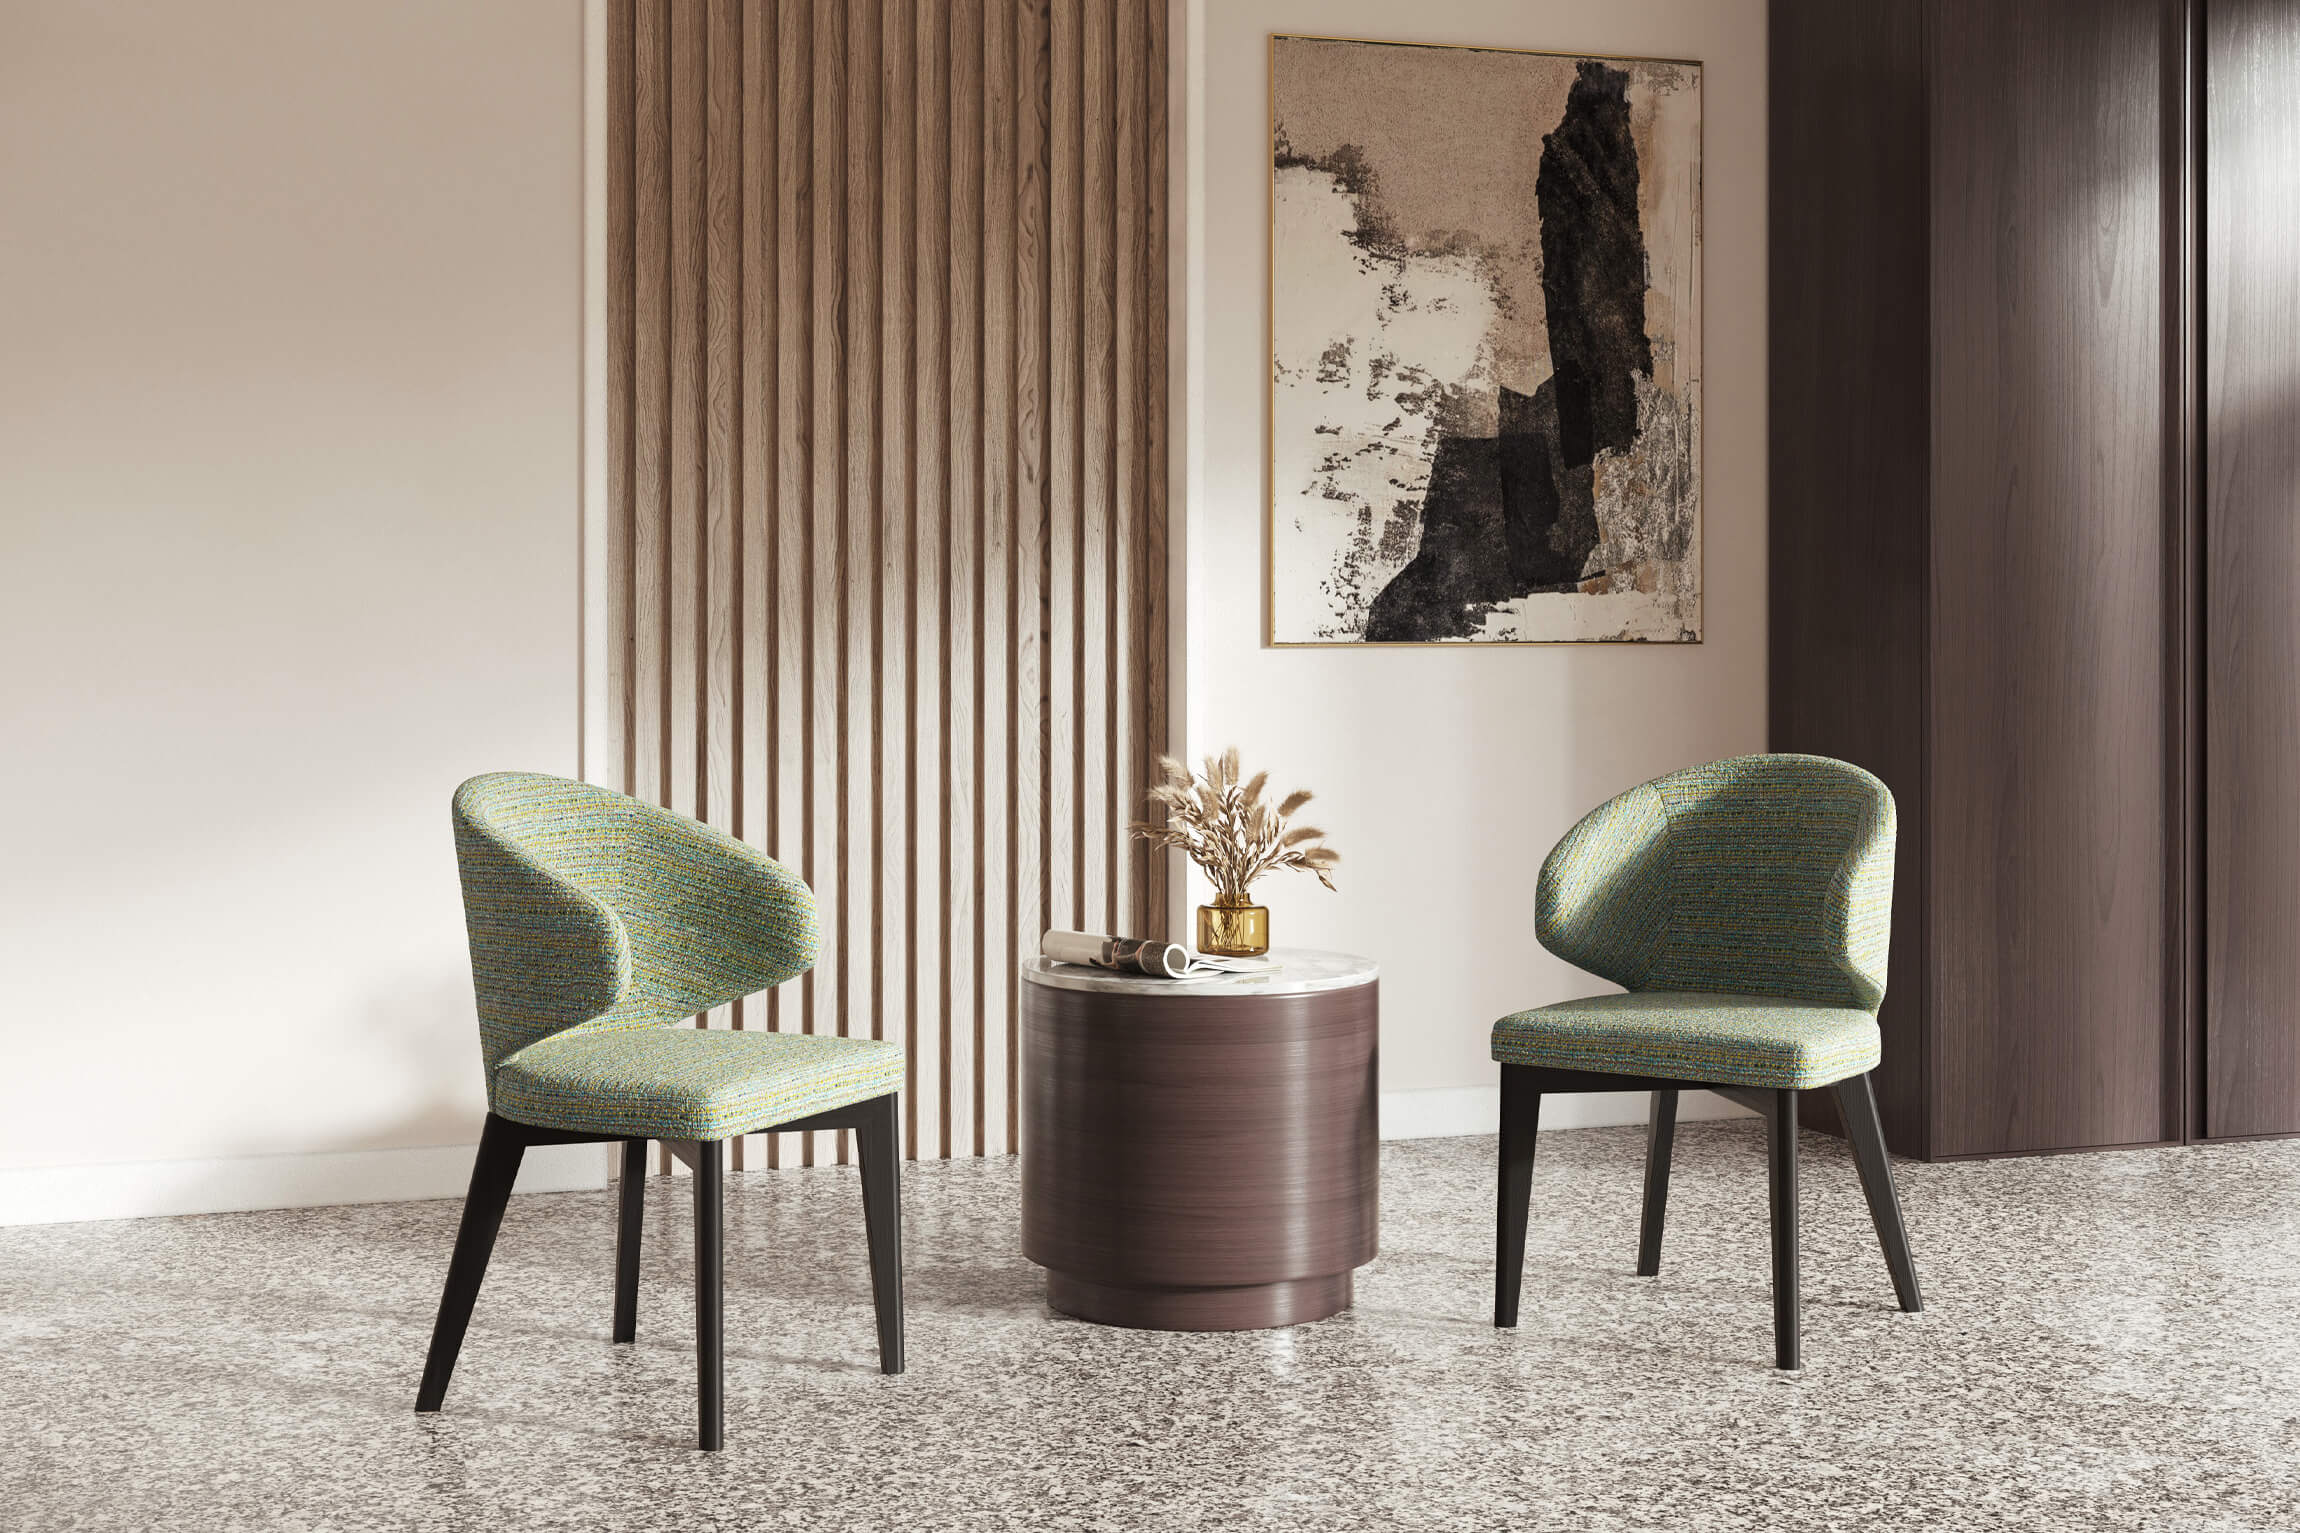 Lifestyle 3D Rendering of Green Chair Design